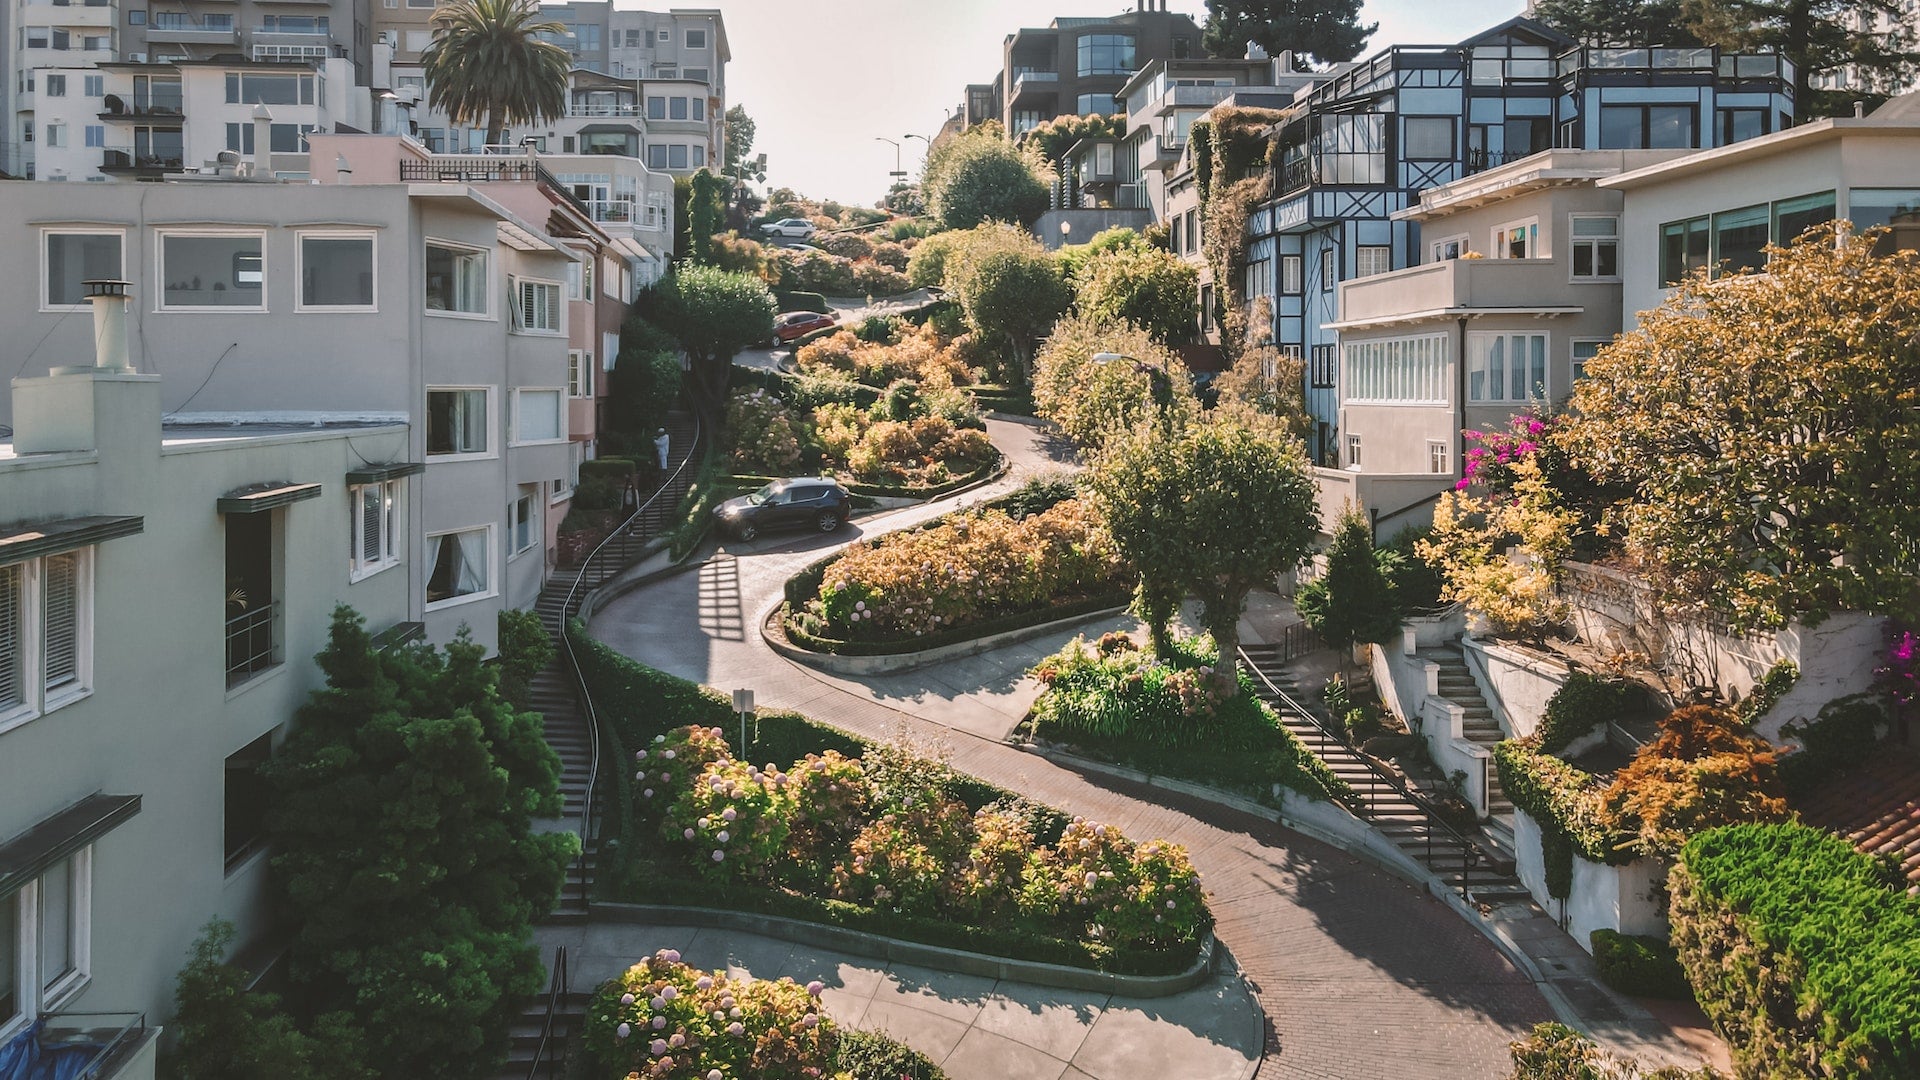 A sunny view looking up Lombard Street in San Francisco California; the winding street is perfect for e-bikes, lined with bushes and trees along with paths and staircases in between the buildings